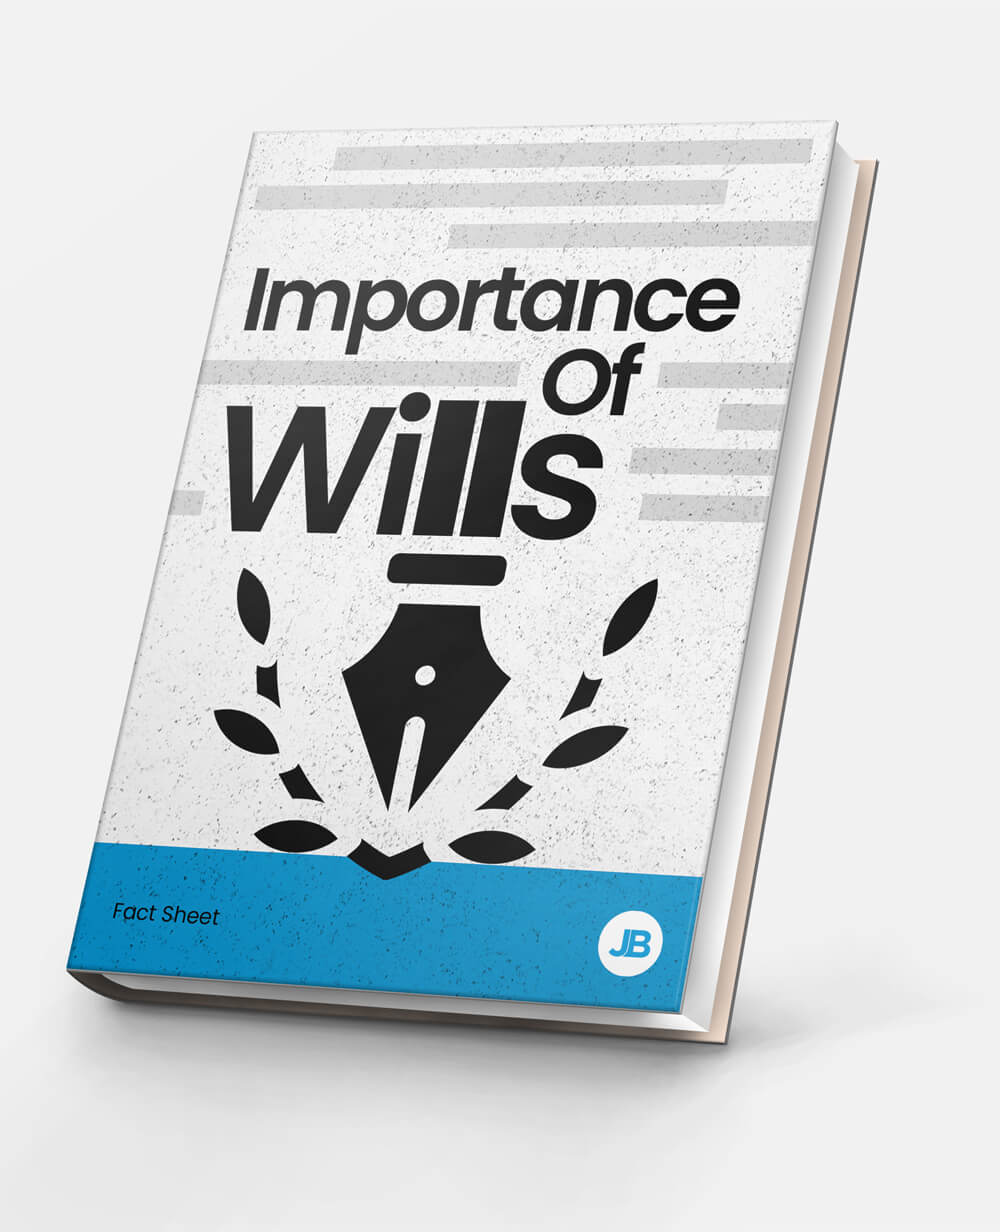 Importance-of-wills